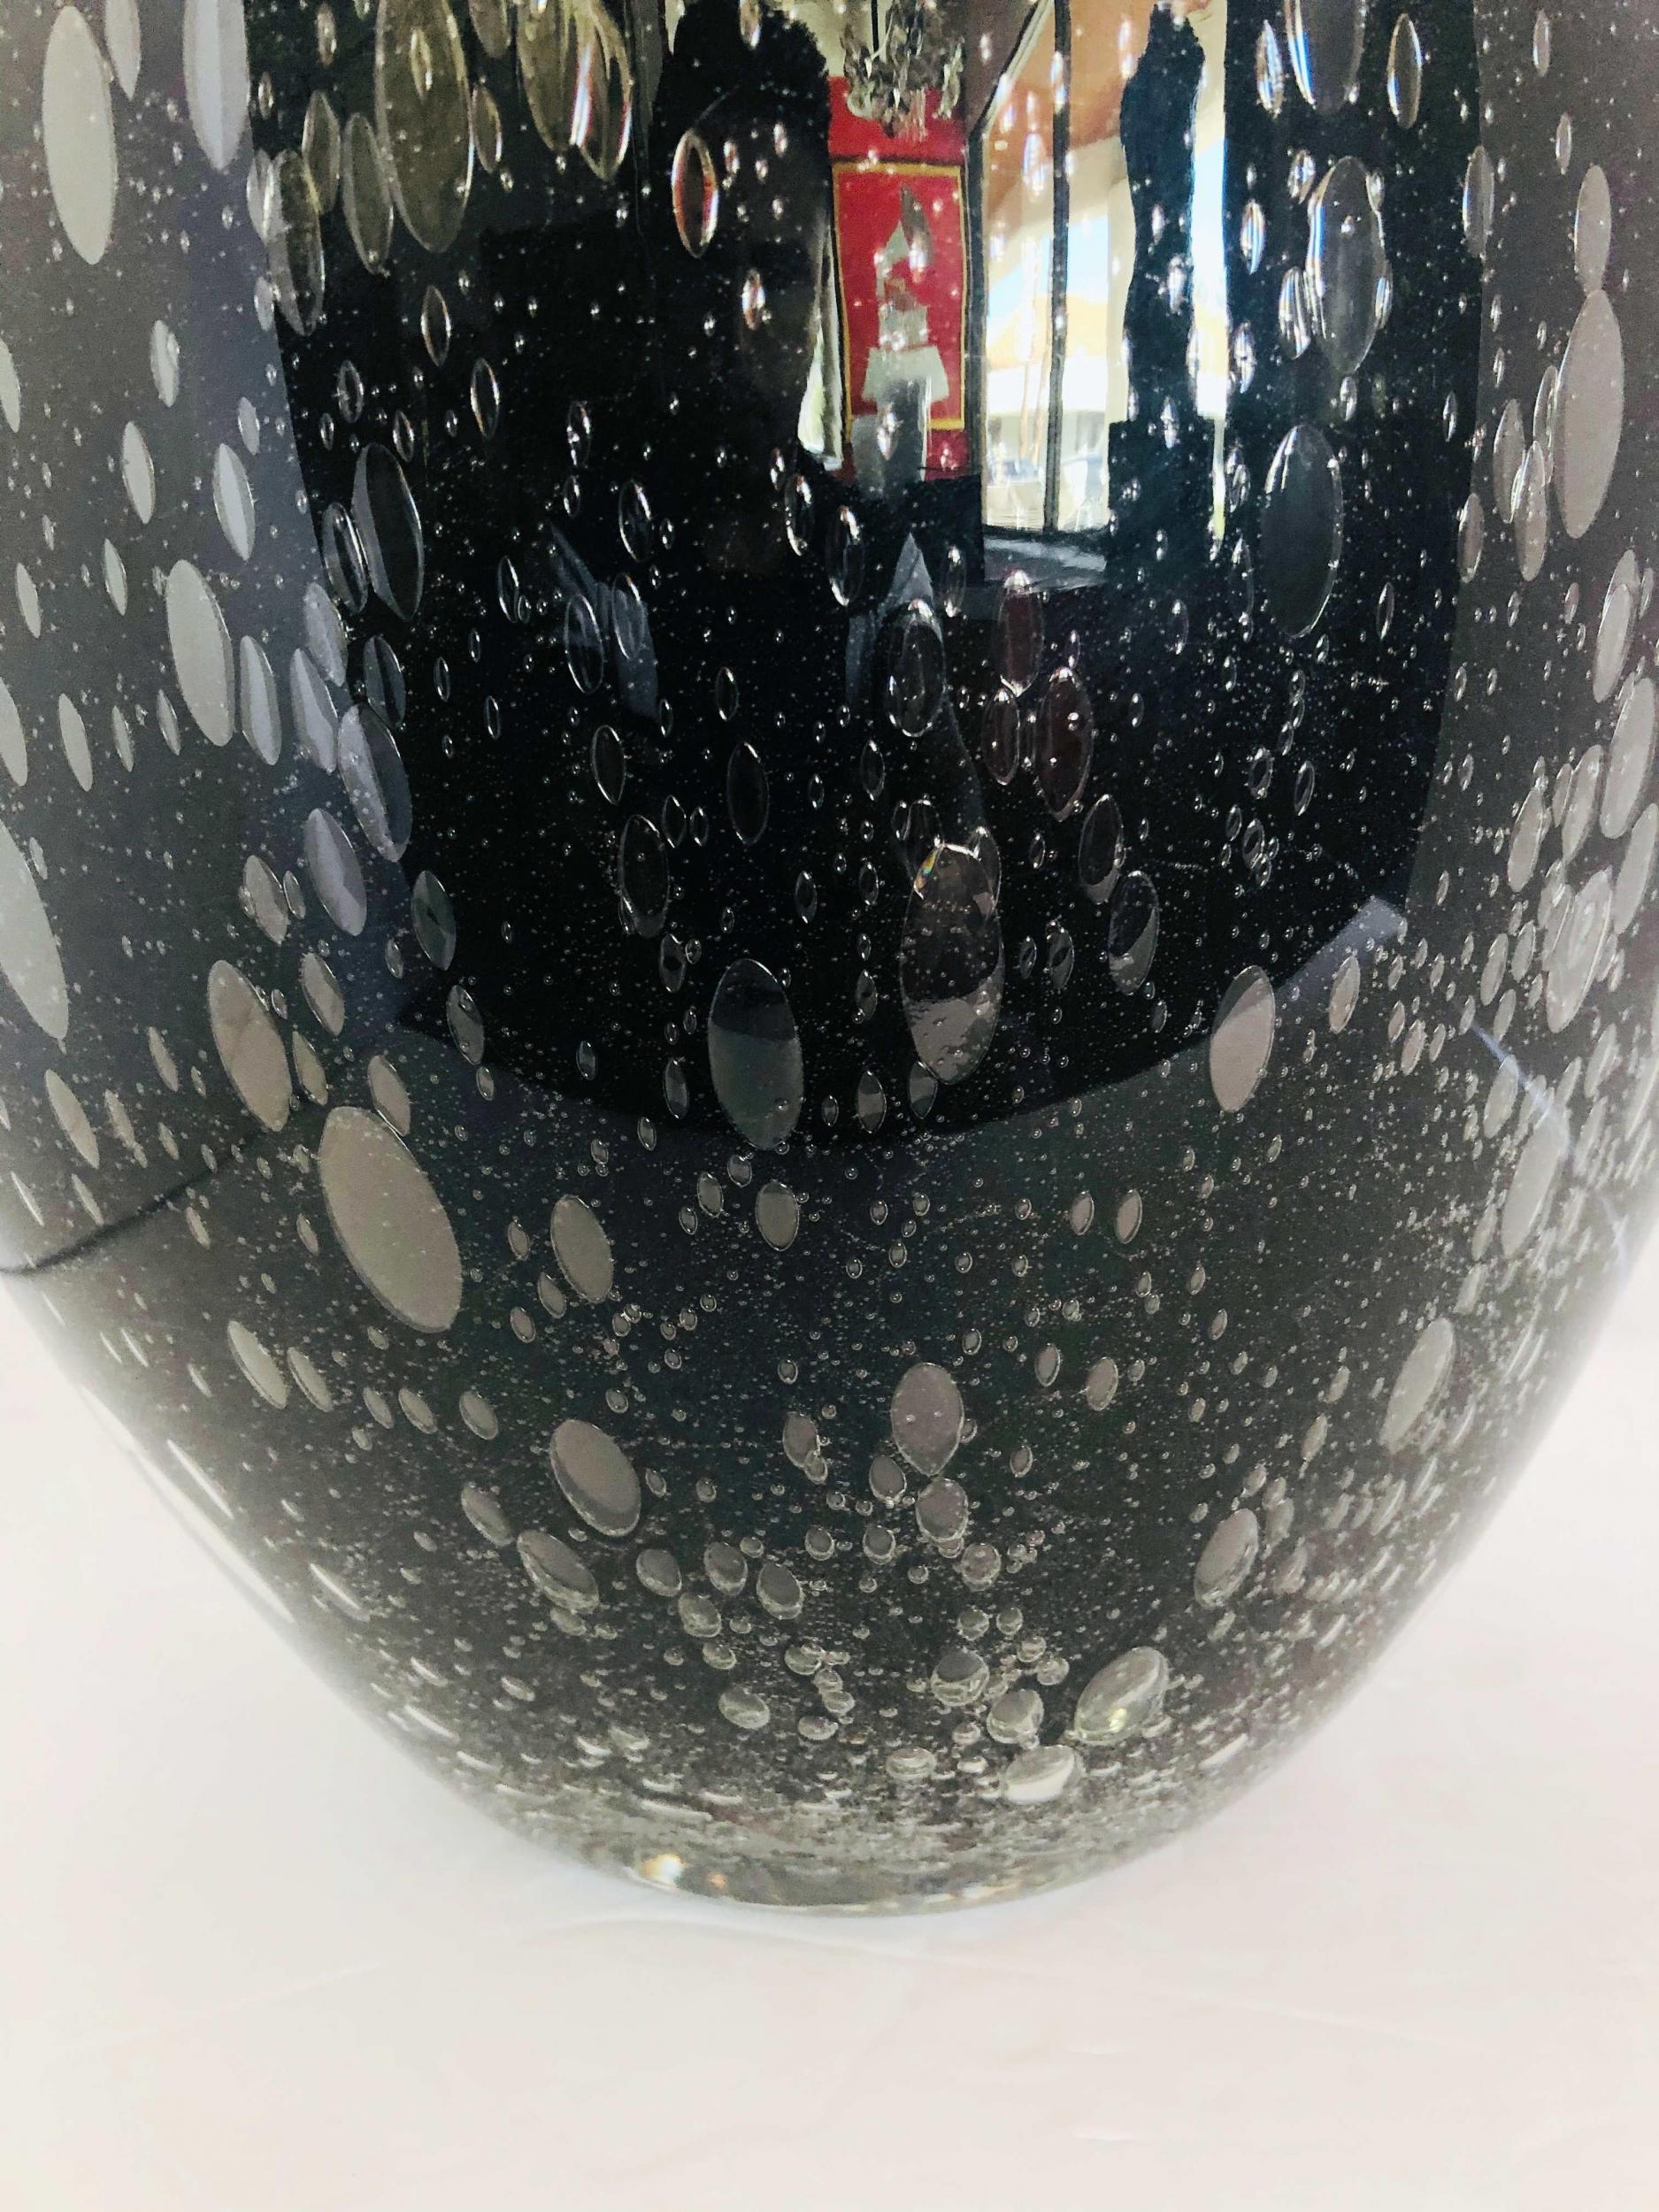 Two Italian vases in thick black Murano glass blown with bubbles within the glass in Pulegoso technique by Alberto Donà Signature engraved on the base / Made in Italy circa 1980s 

Measurements provided are for the bigger vase.